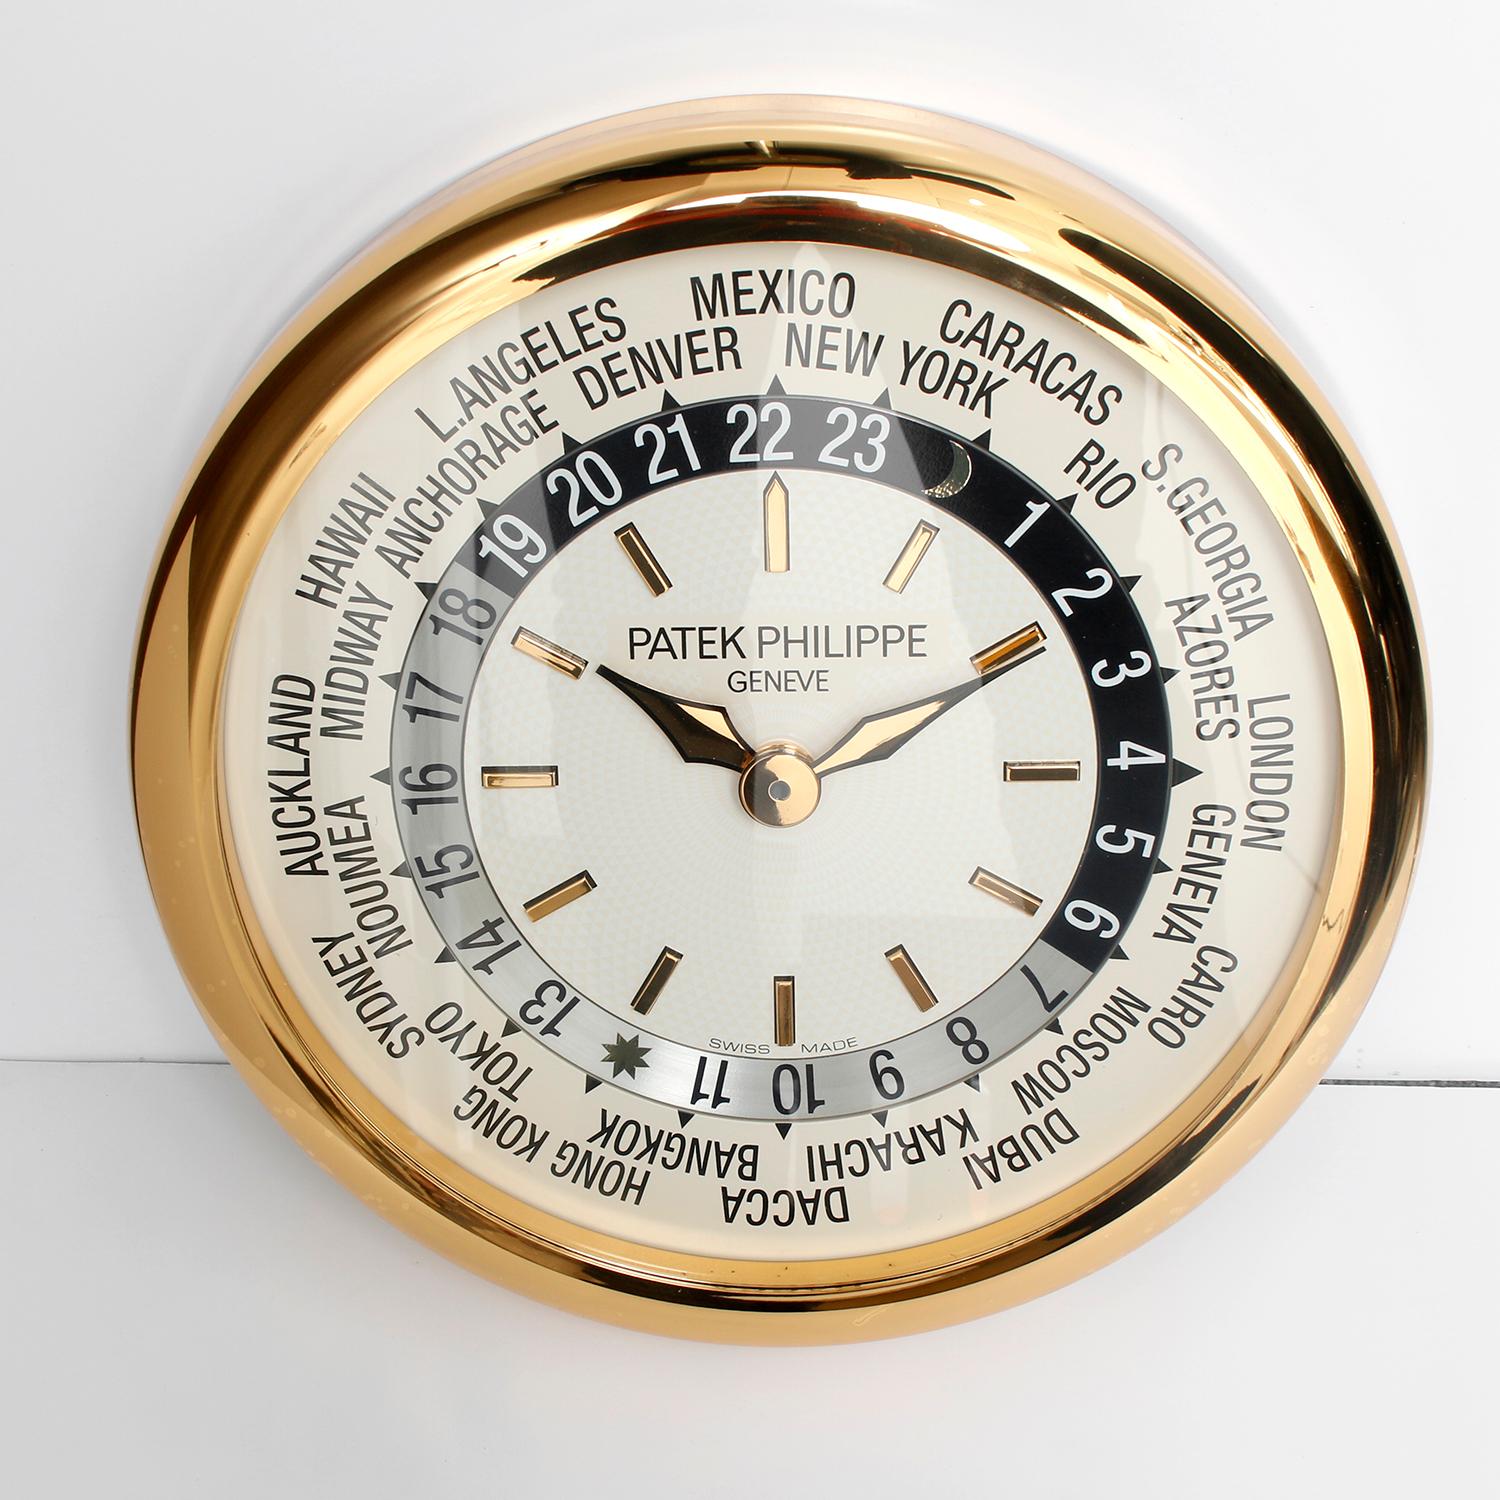 Patek Philippe & Co. World Time - Hours of The World Clock - Quartz. 15.7 inches in diameter. Silver dial with gold markers and silver and black 24-hour time zone dial. Original and rare.